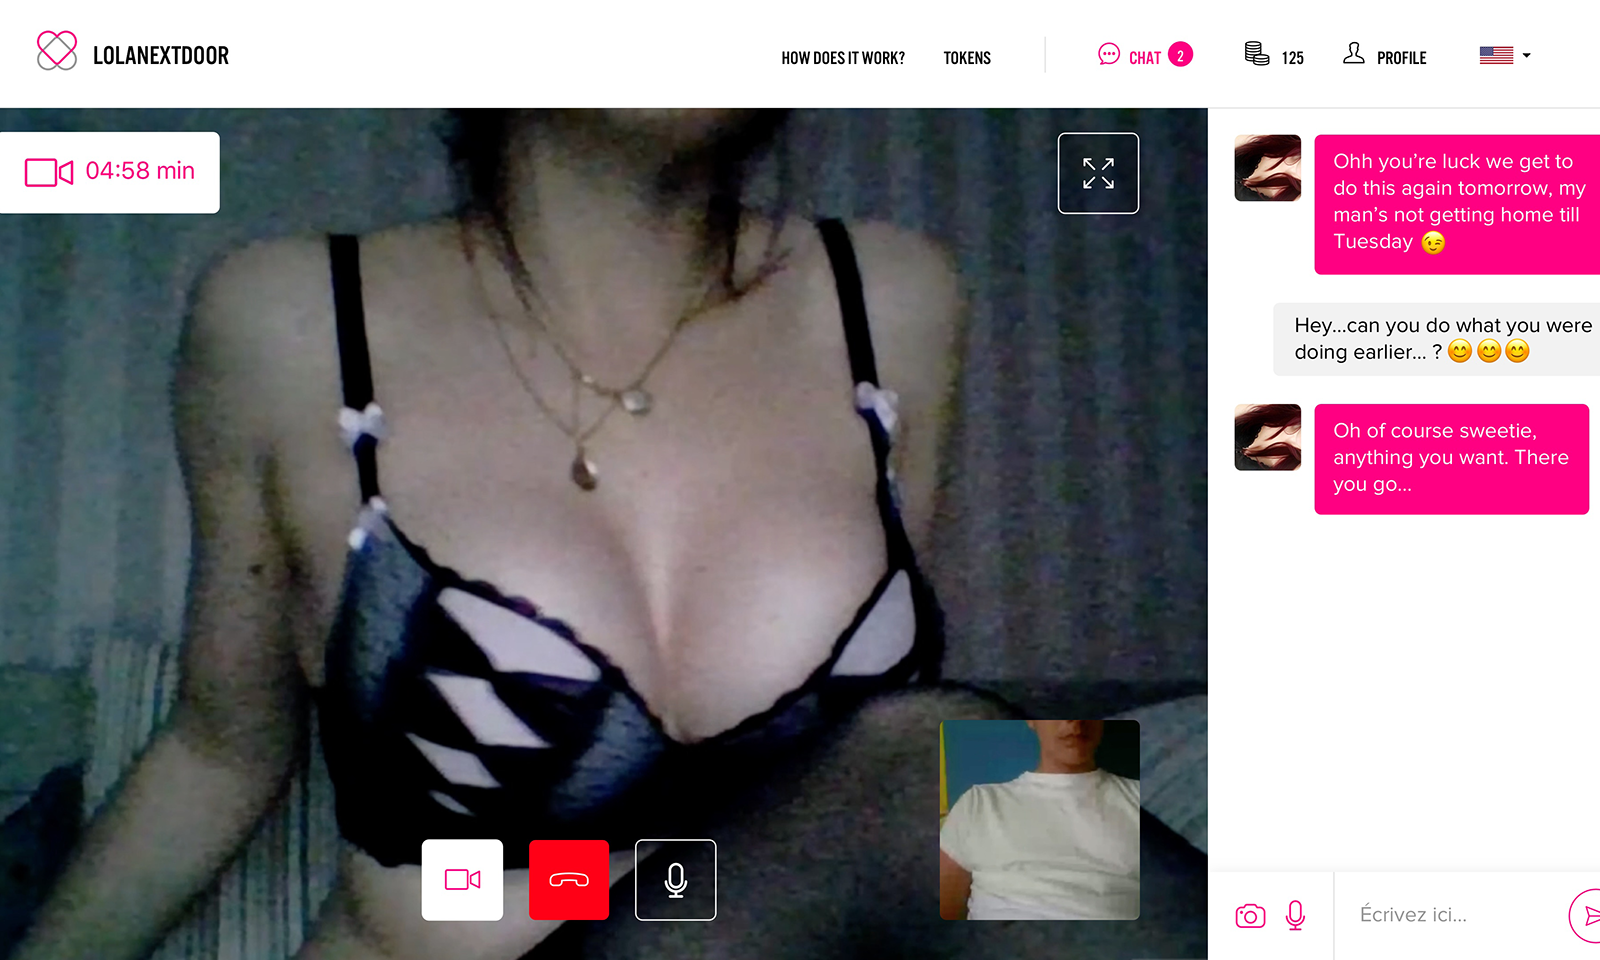 Chat Site LolaNextDoor Bills Itself as the 'Uber for Virtual Sex'